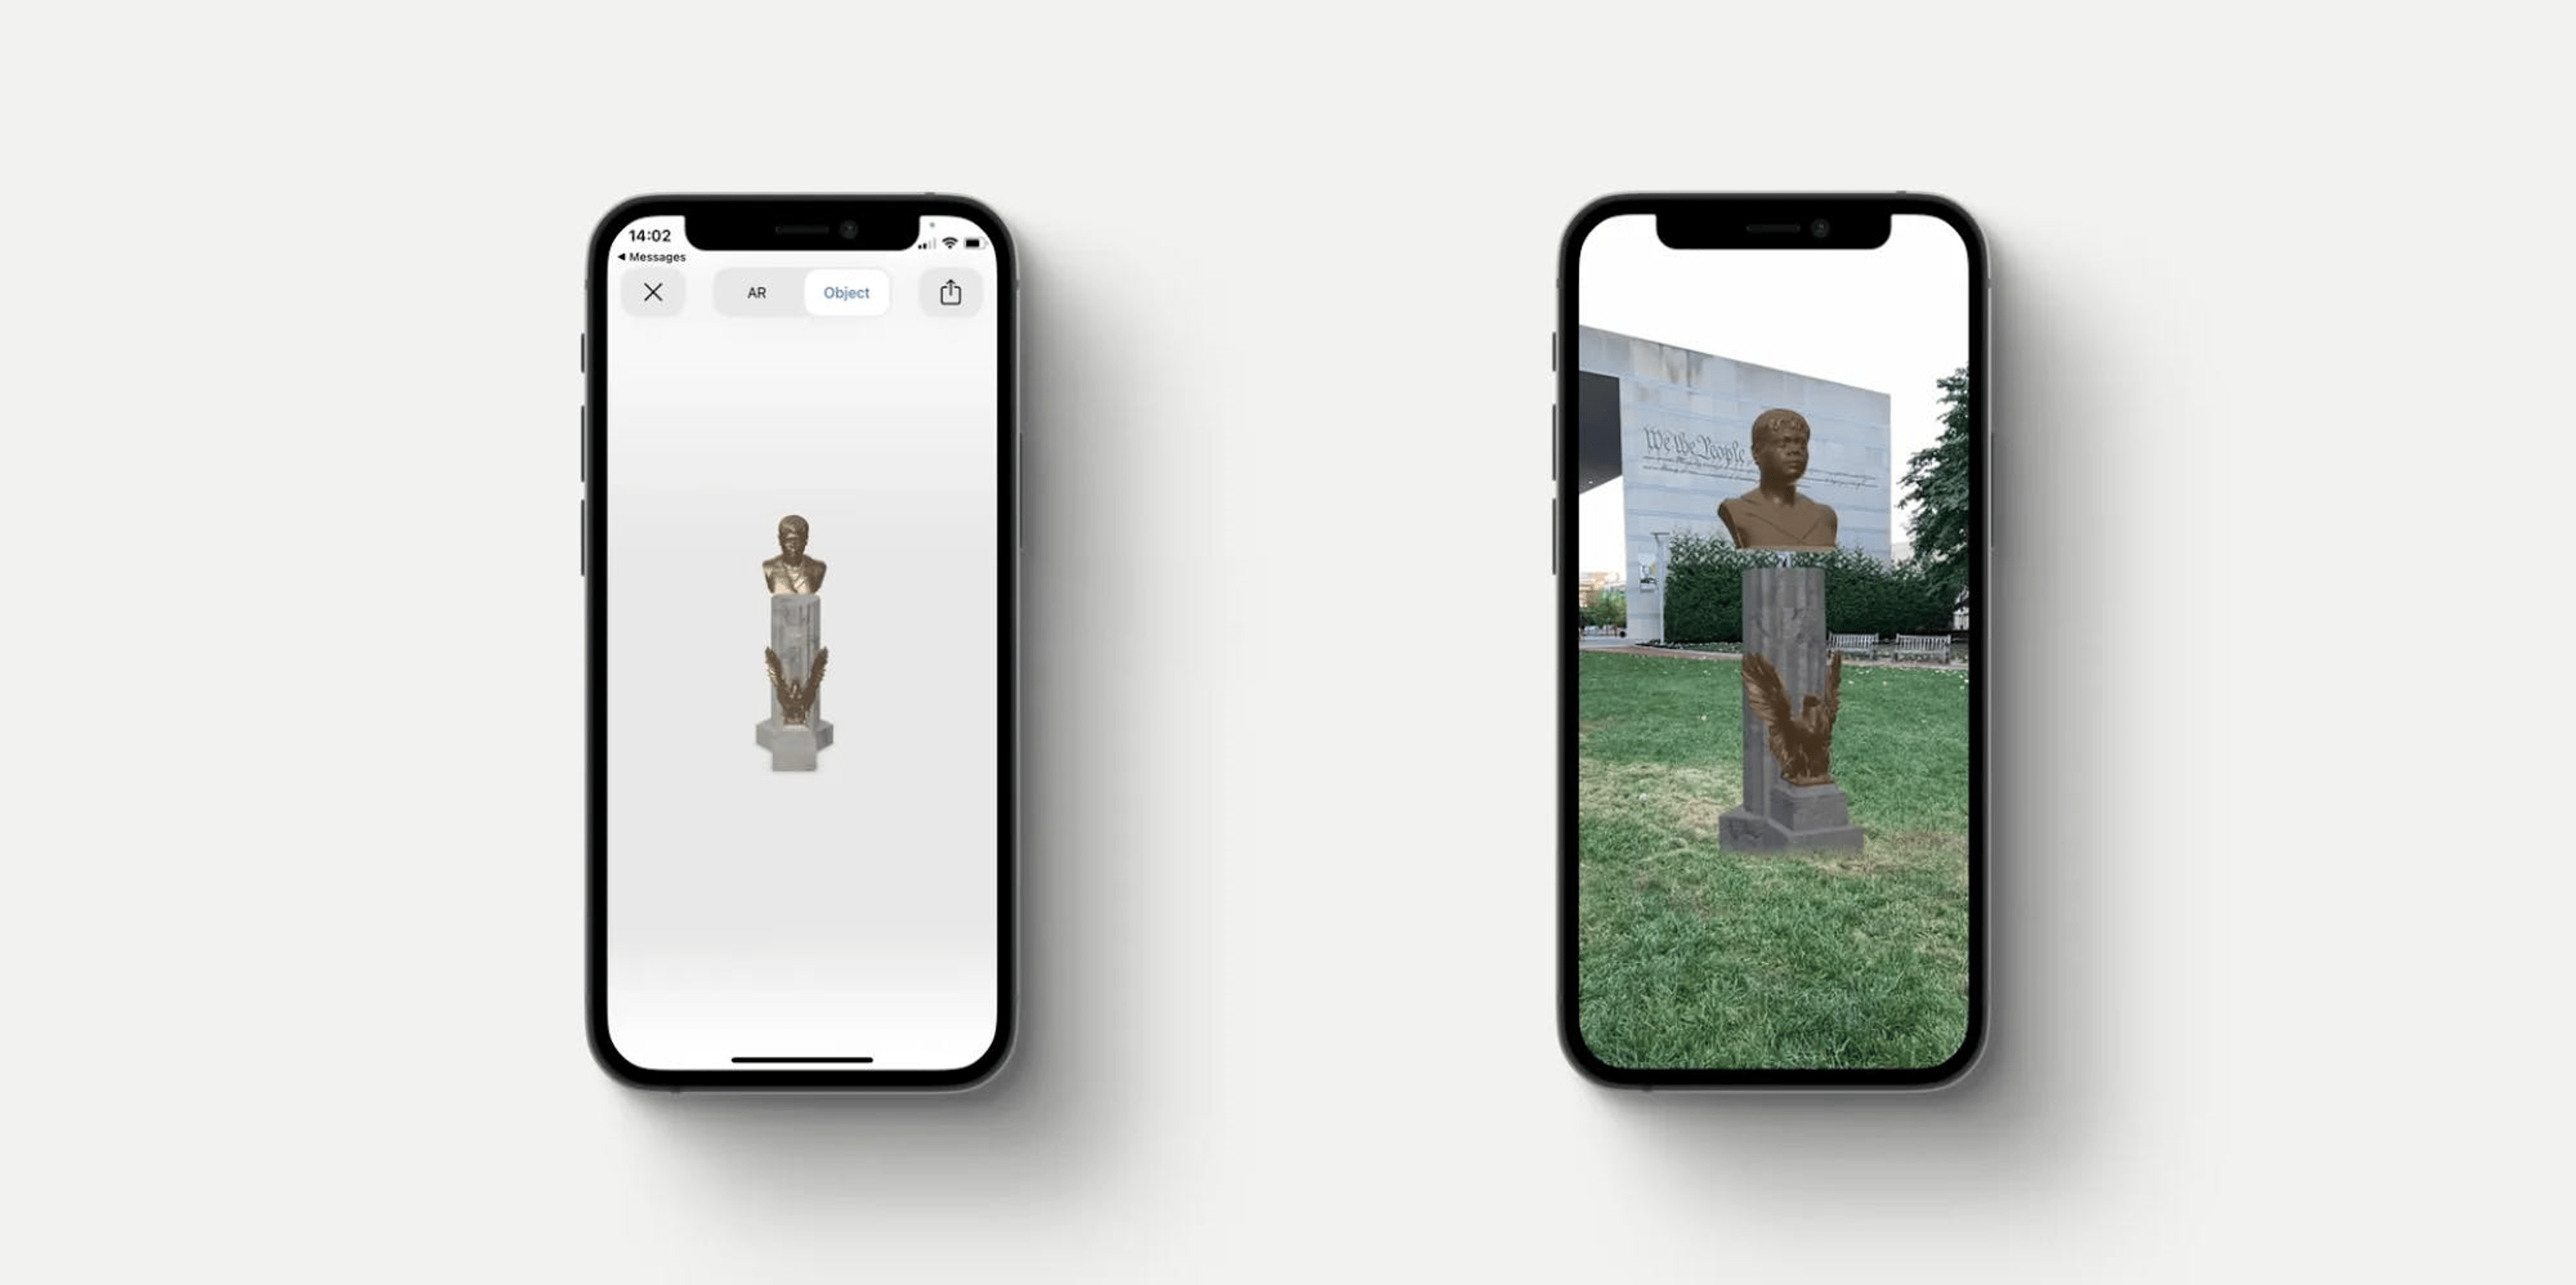 AR generated monuments are shown on two smartphones placed against a white background.